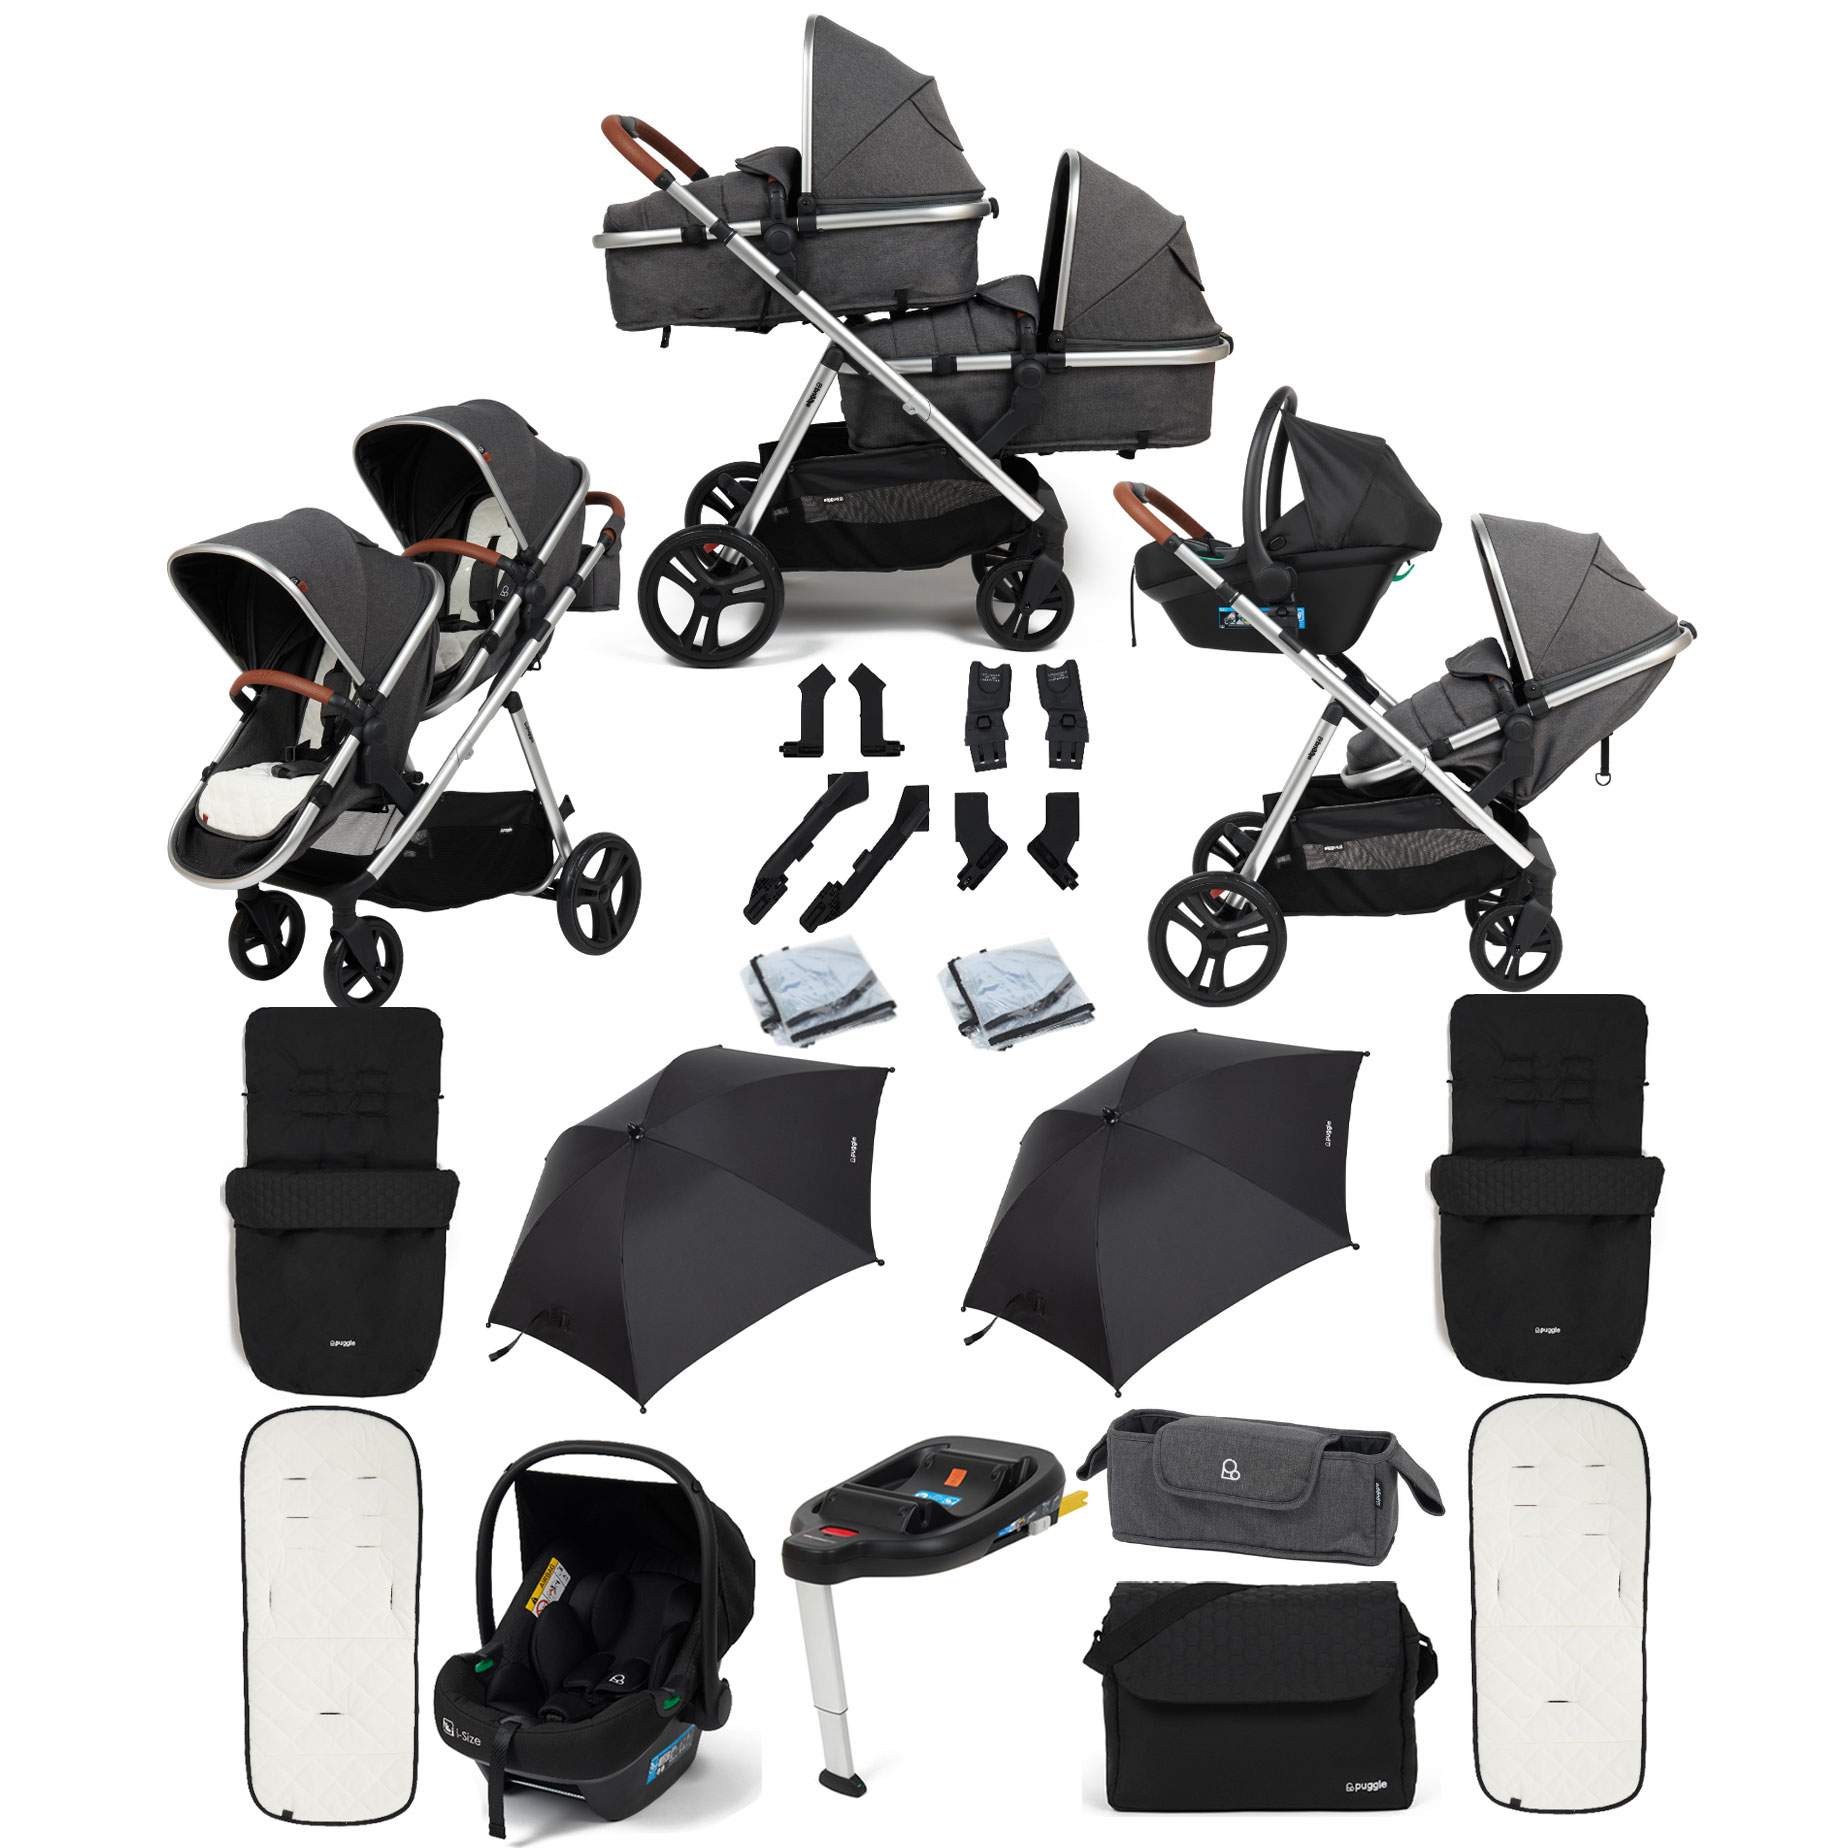 Puggle Memphis 2-in-1 Duo i-Size Double Travel System with 2 Footmuffs, Changing Bag, 2 Parasols & i-Size Car Seat with Base - Platinum Grey